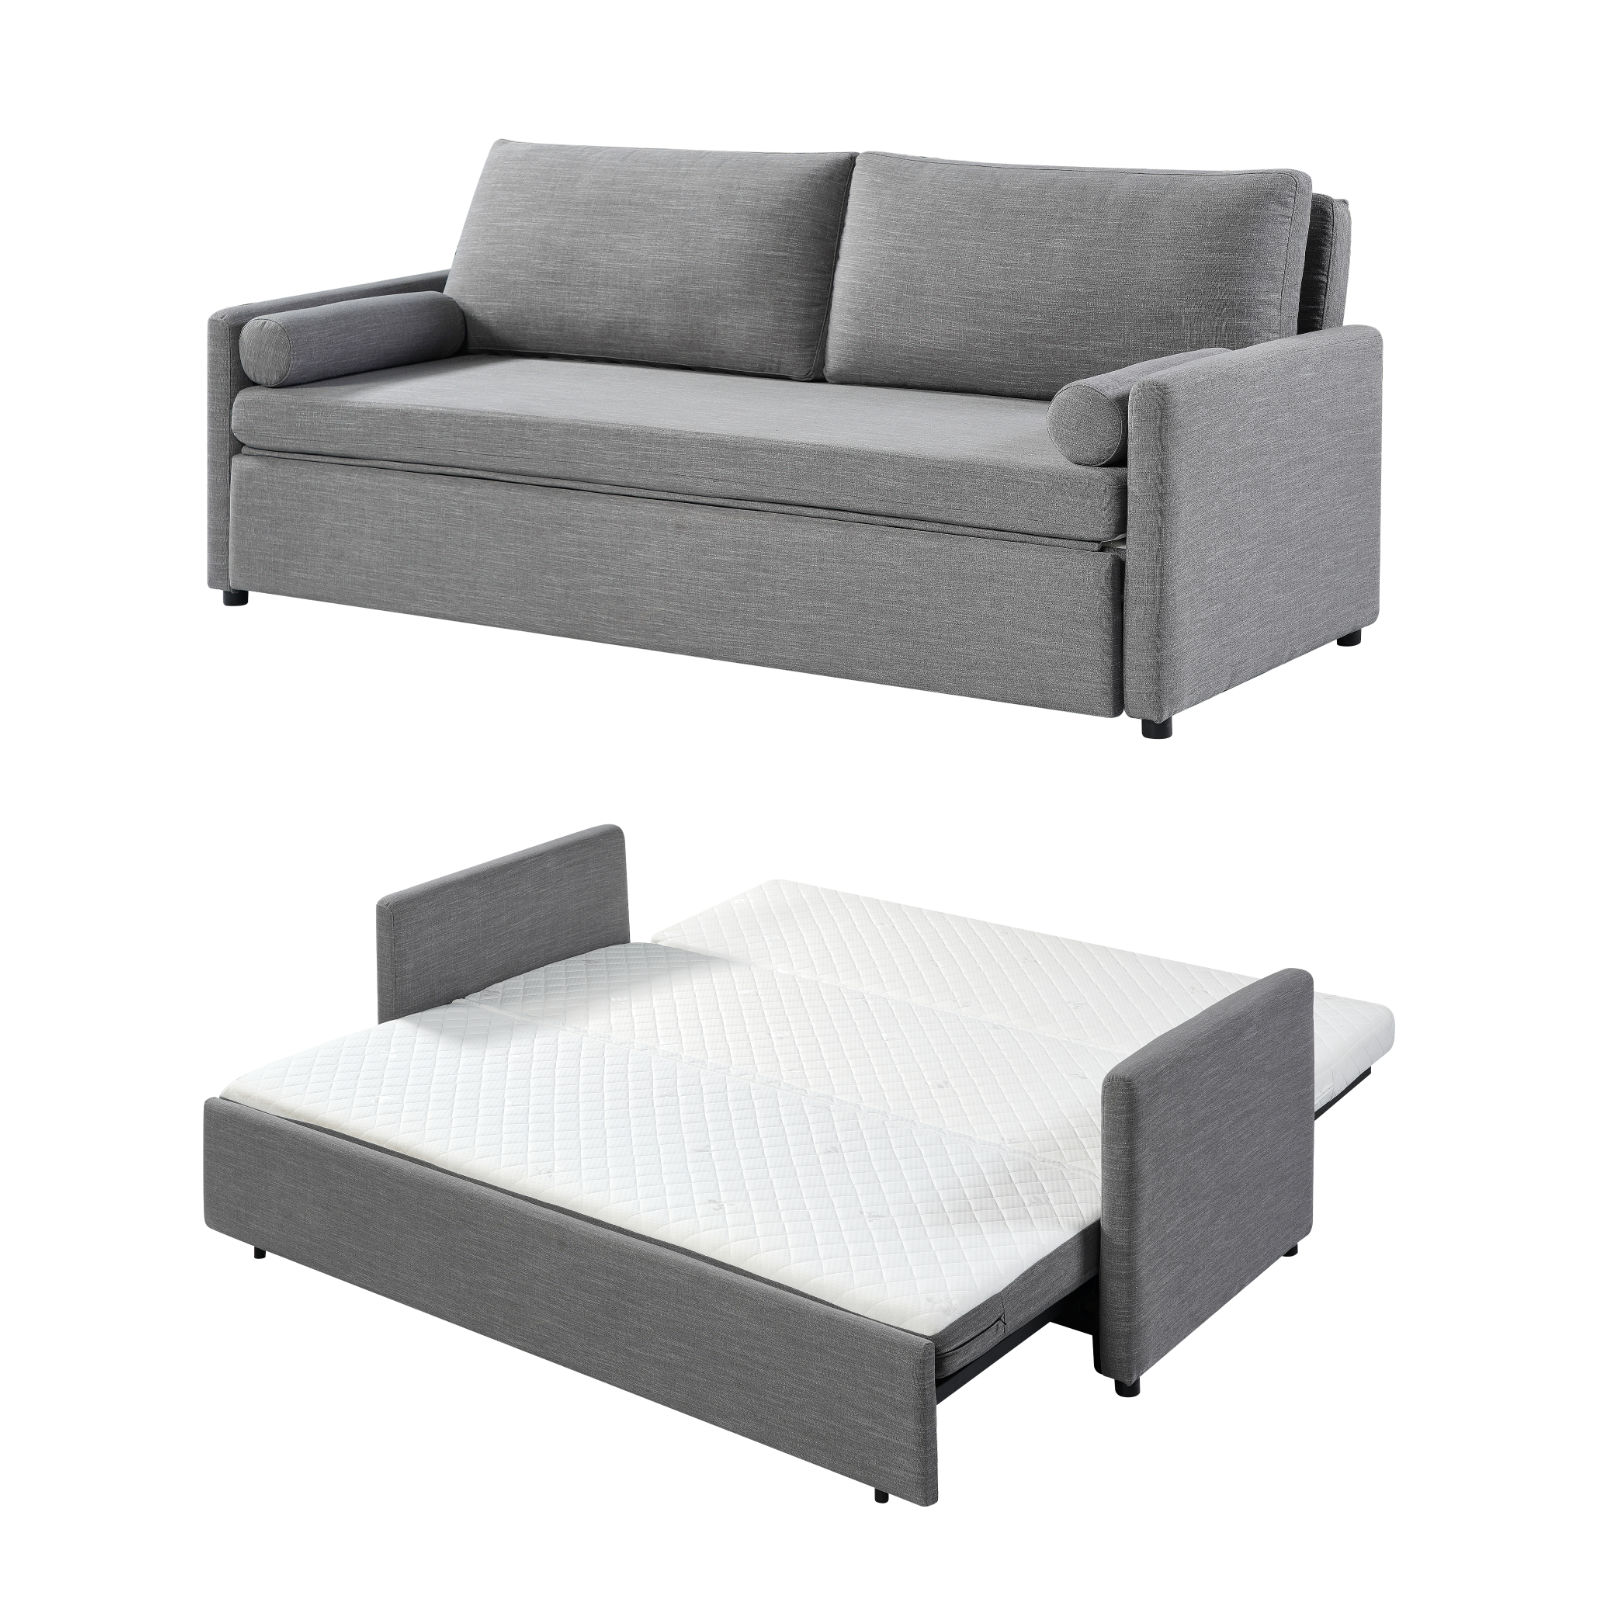 Harmony – King Sofa bed with Memory Foam - Expand Furniture - Folding  Tables, Smarter Wall Beds, Space Savers